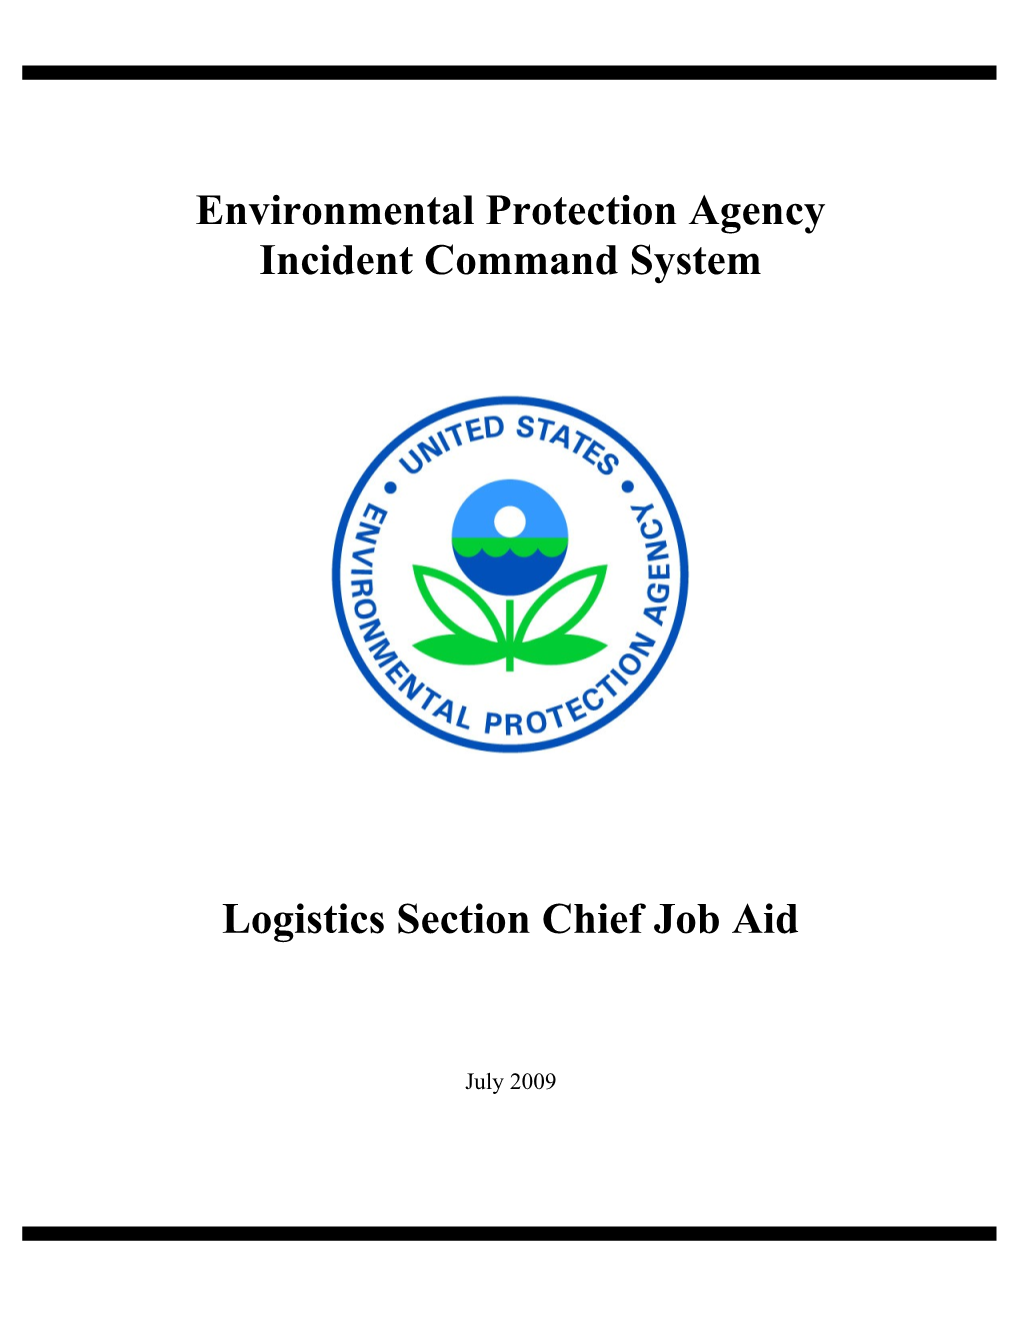 Environmental Protection Agency s5